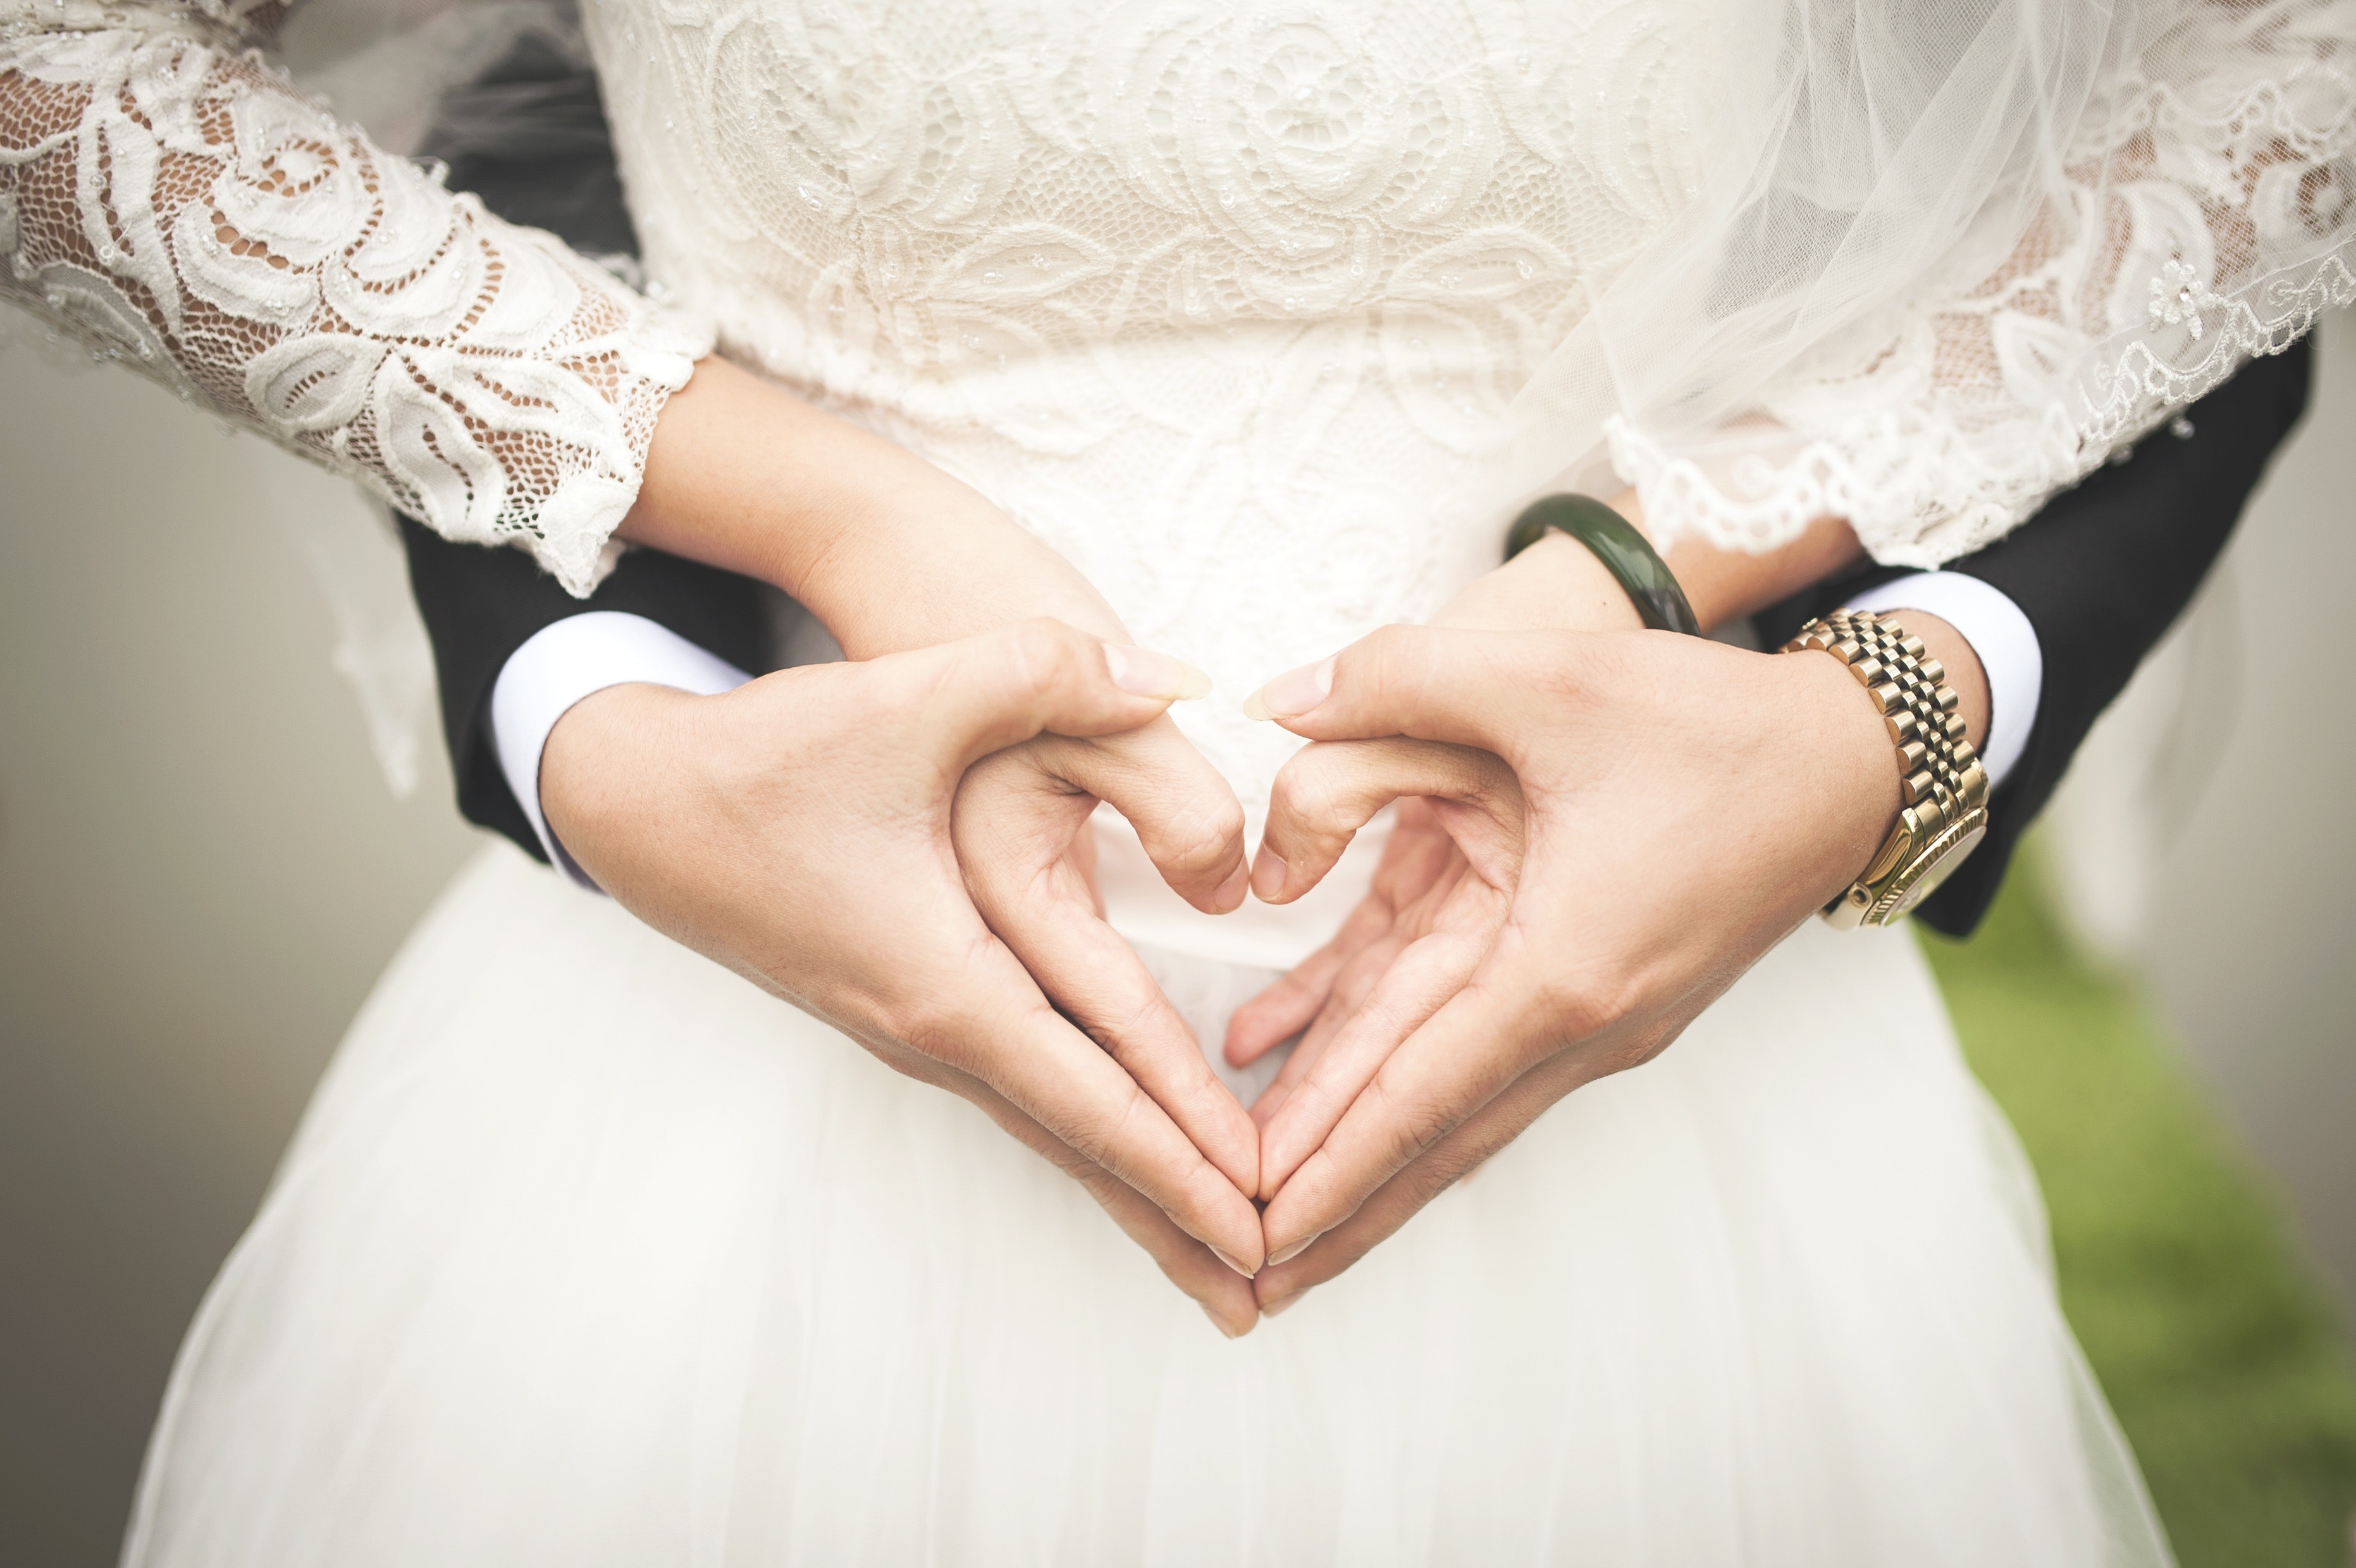 Midsection of Woman Making Heart Shape With Hands, Beautiful, Romantic, Marriage, Married, HQ Photo